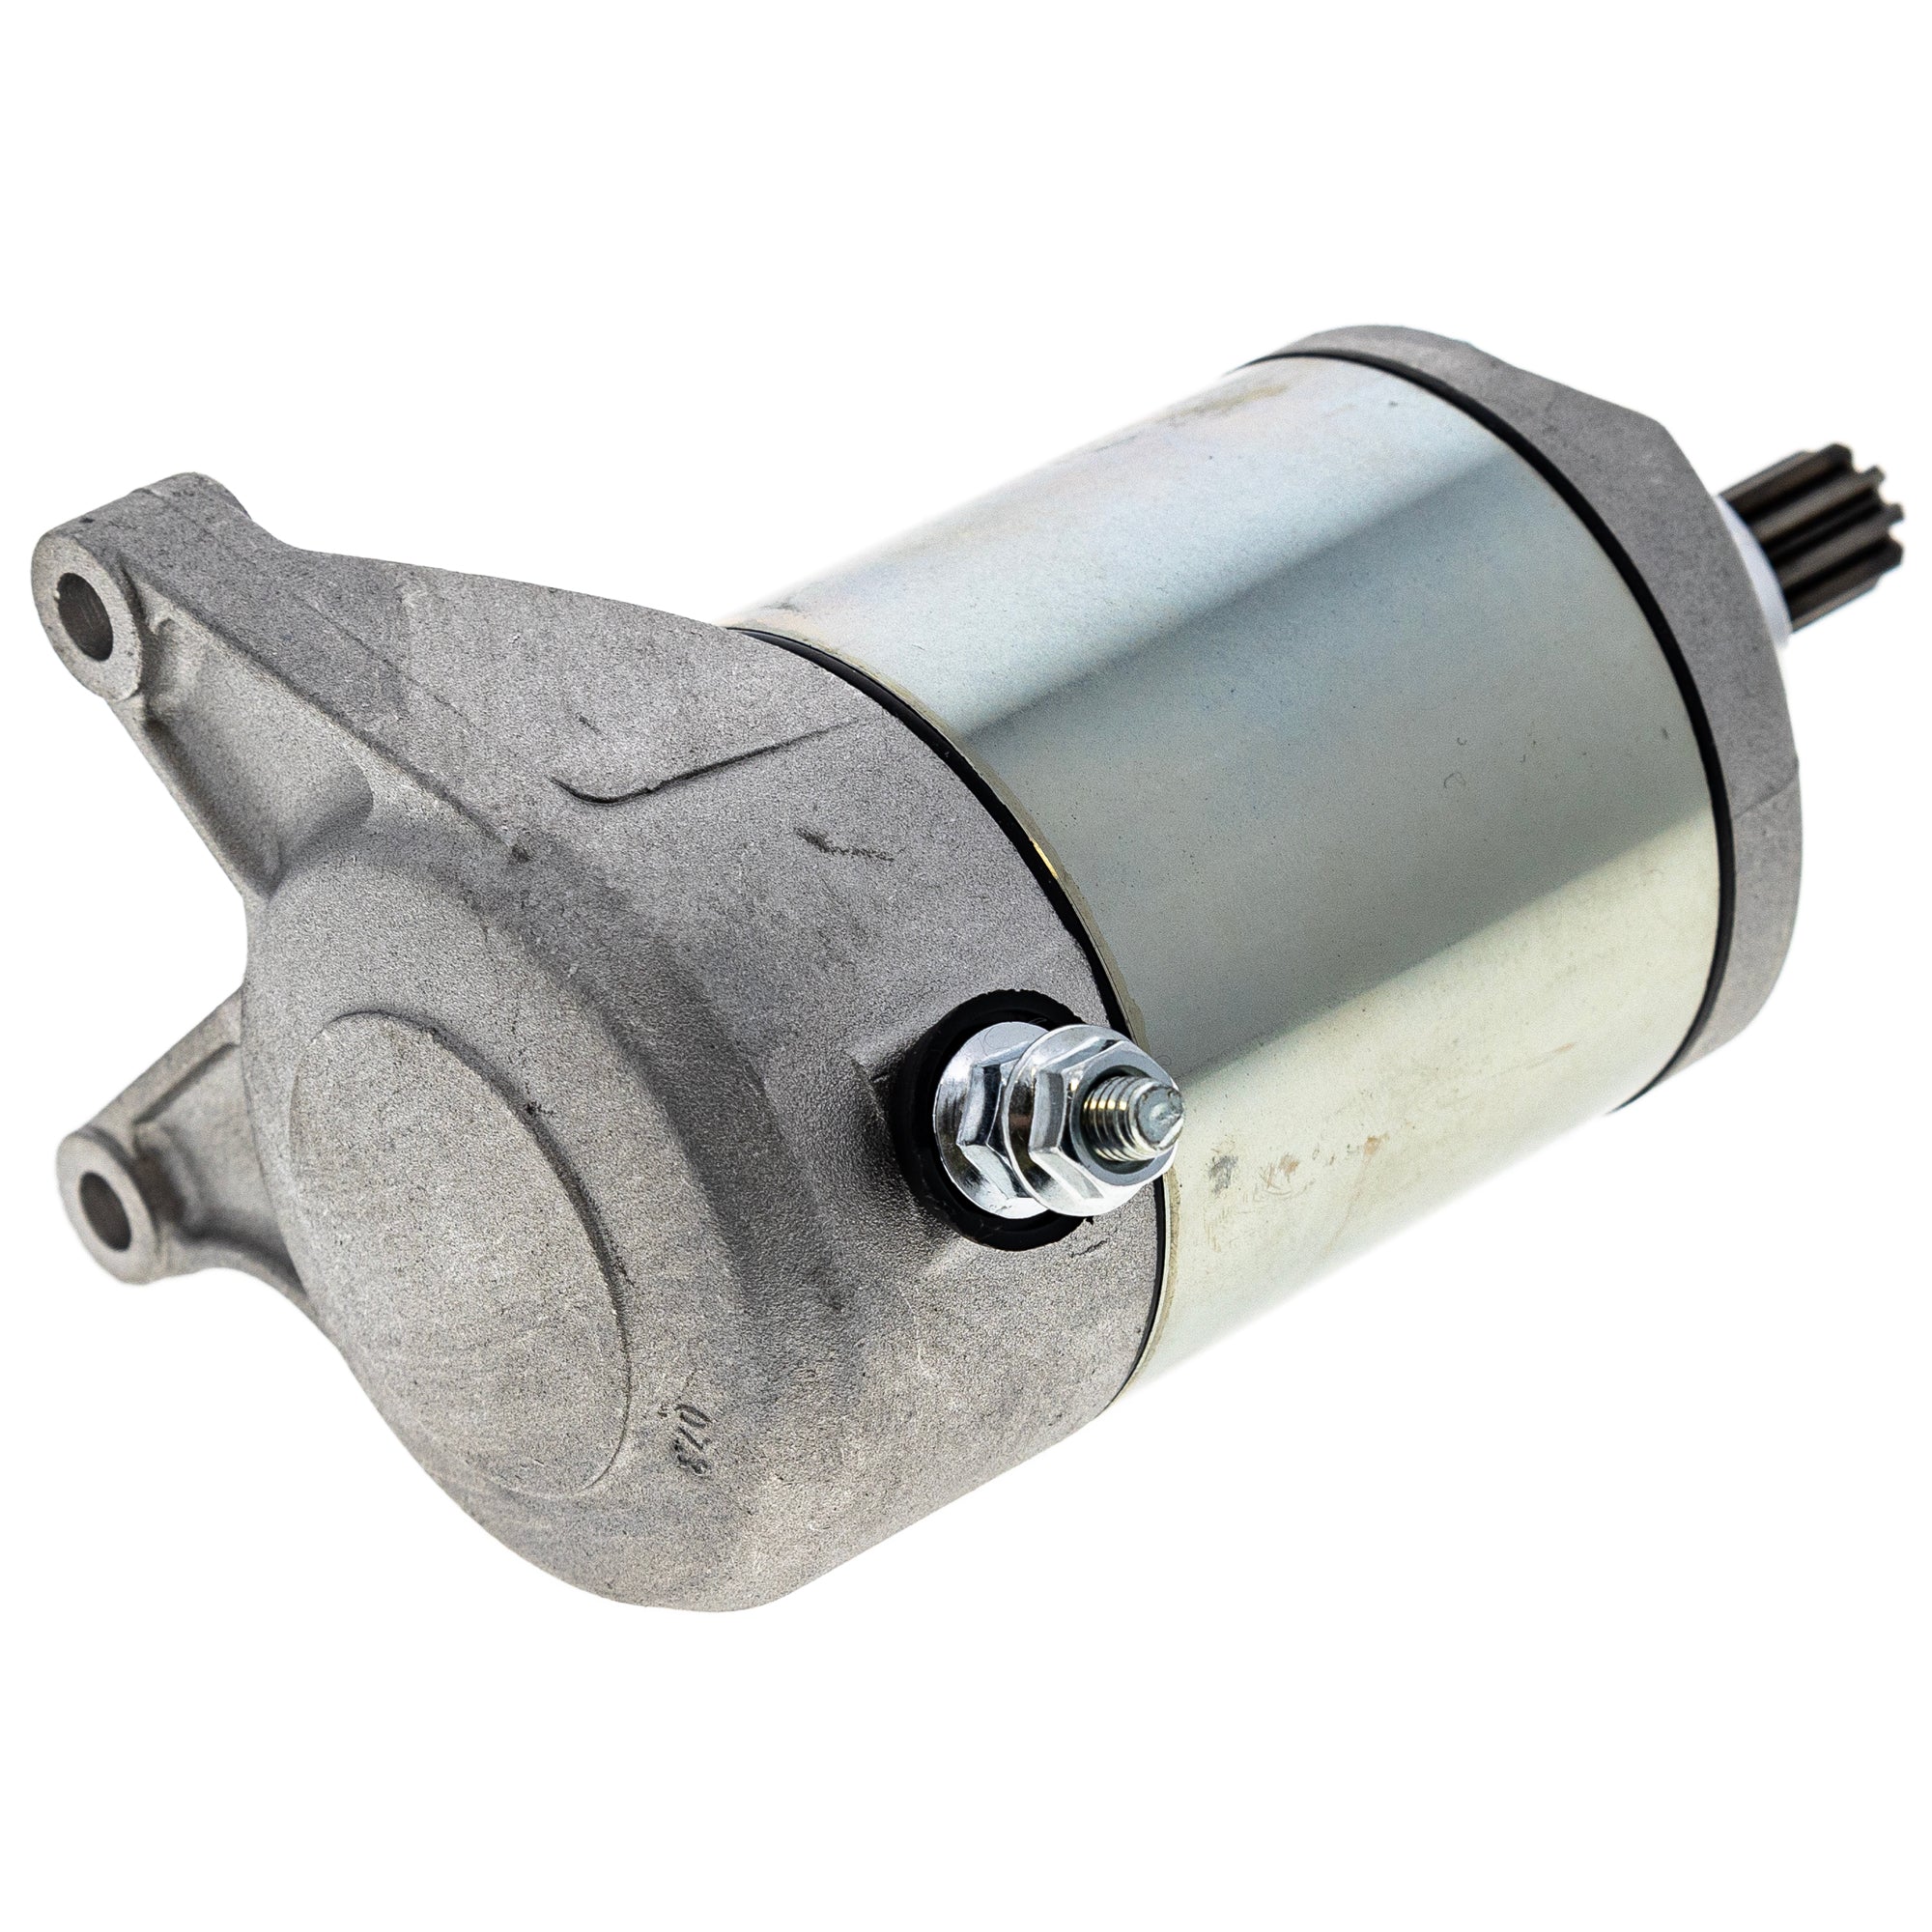 Starter Motor Assembly for Yamaha YZF750R YZF1000R FZR1000 GTS1000A